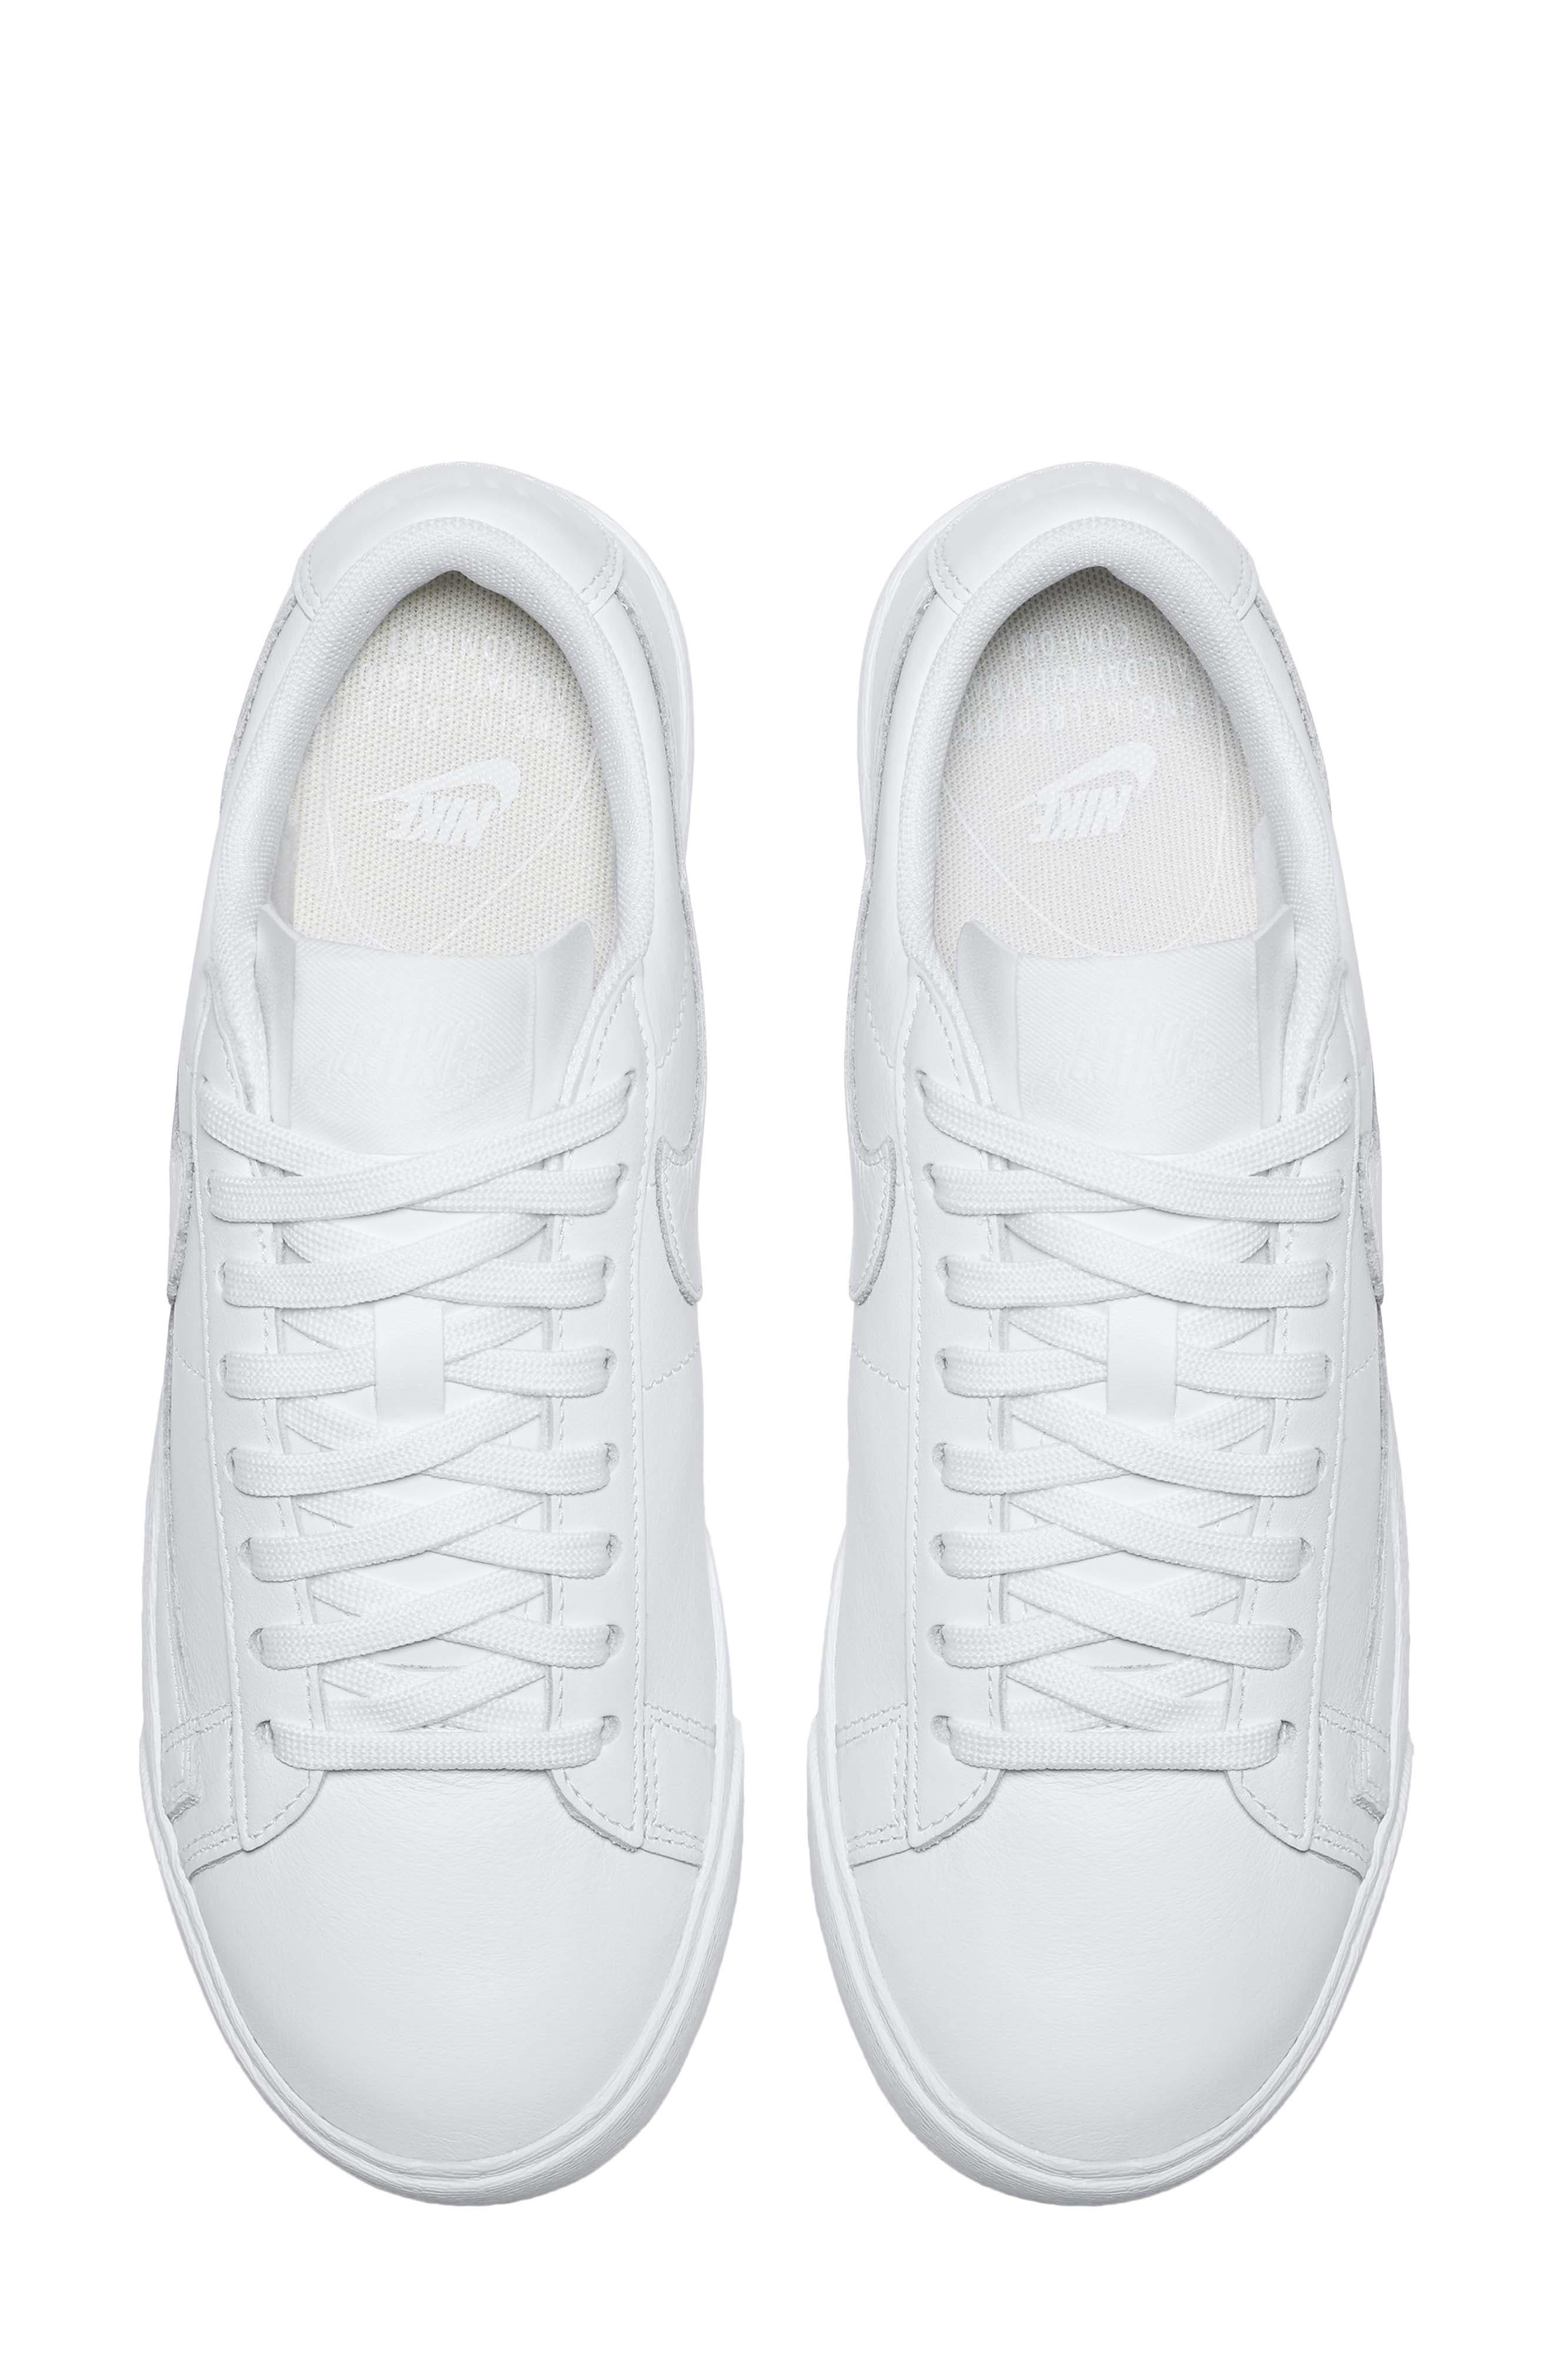 Nike Blazer Low Le Shoes in White | Lyst